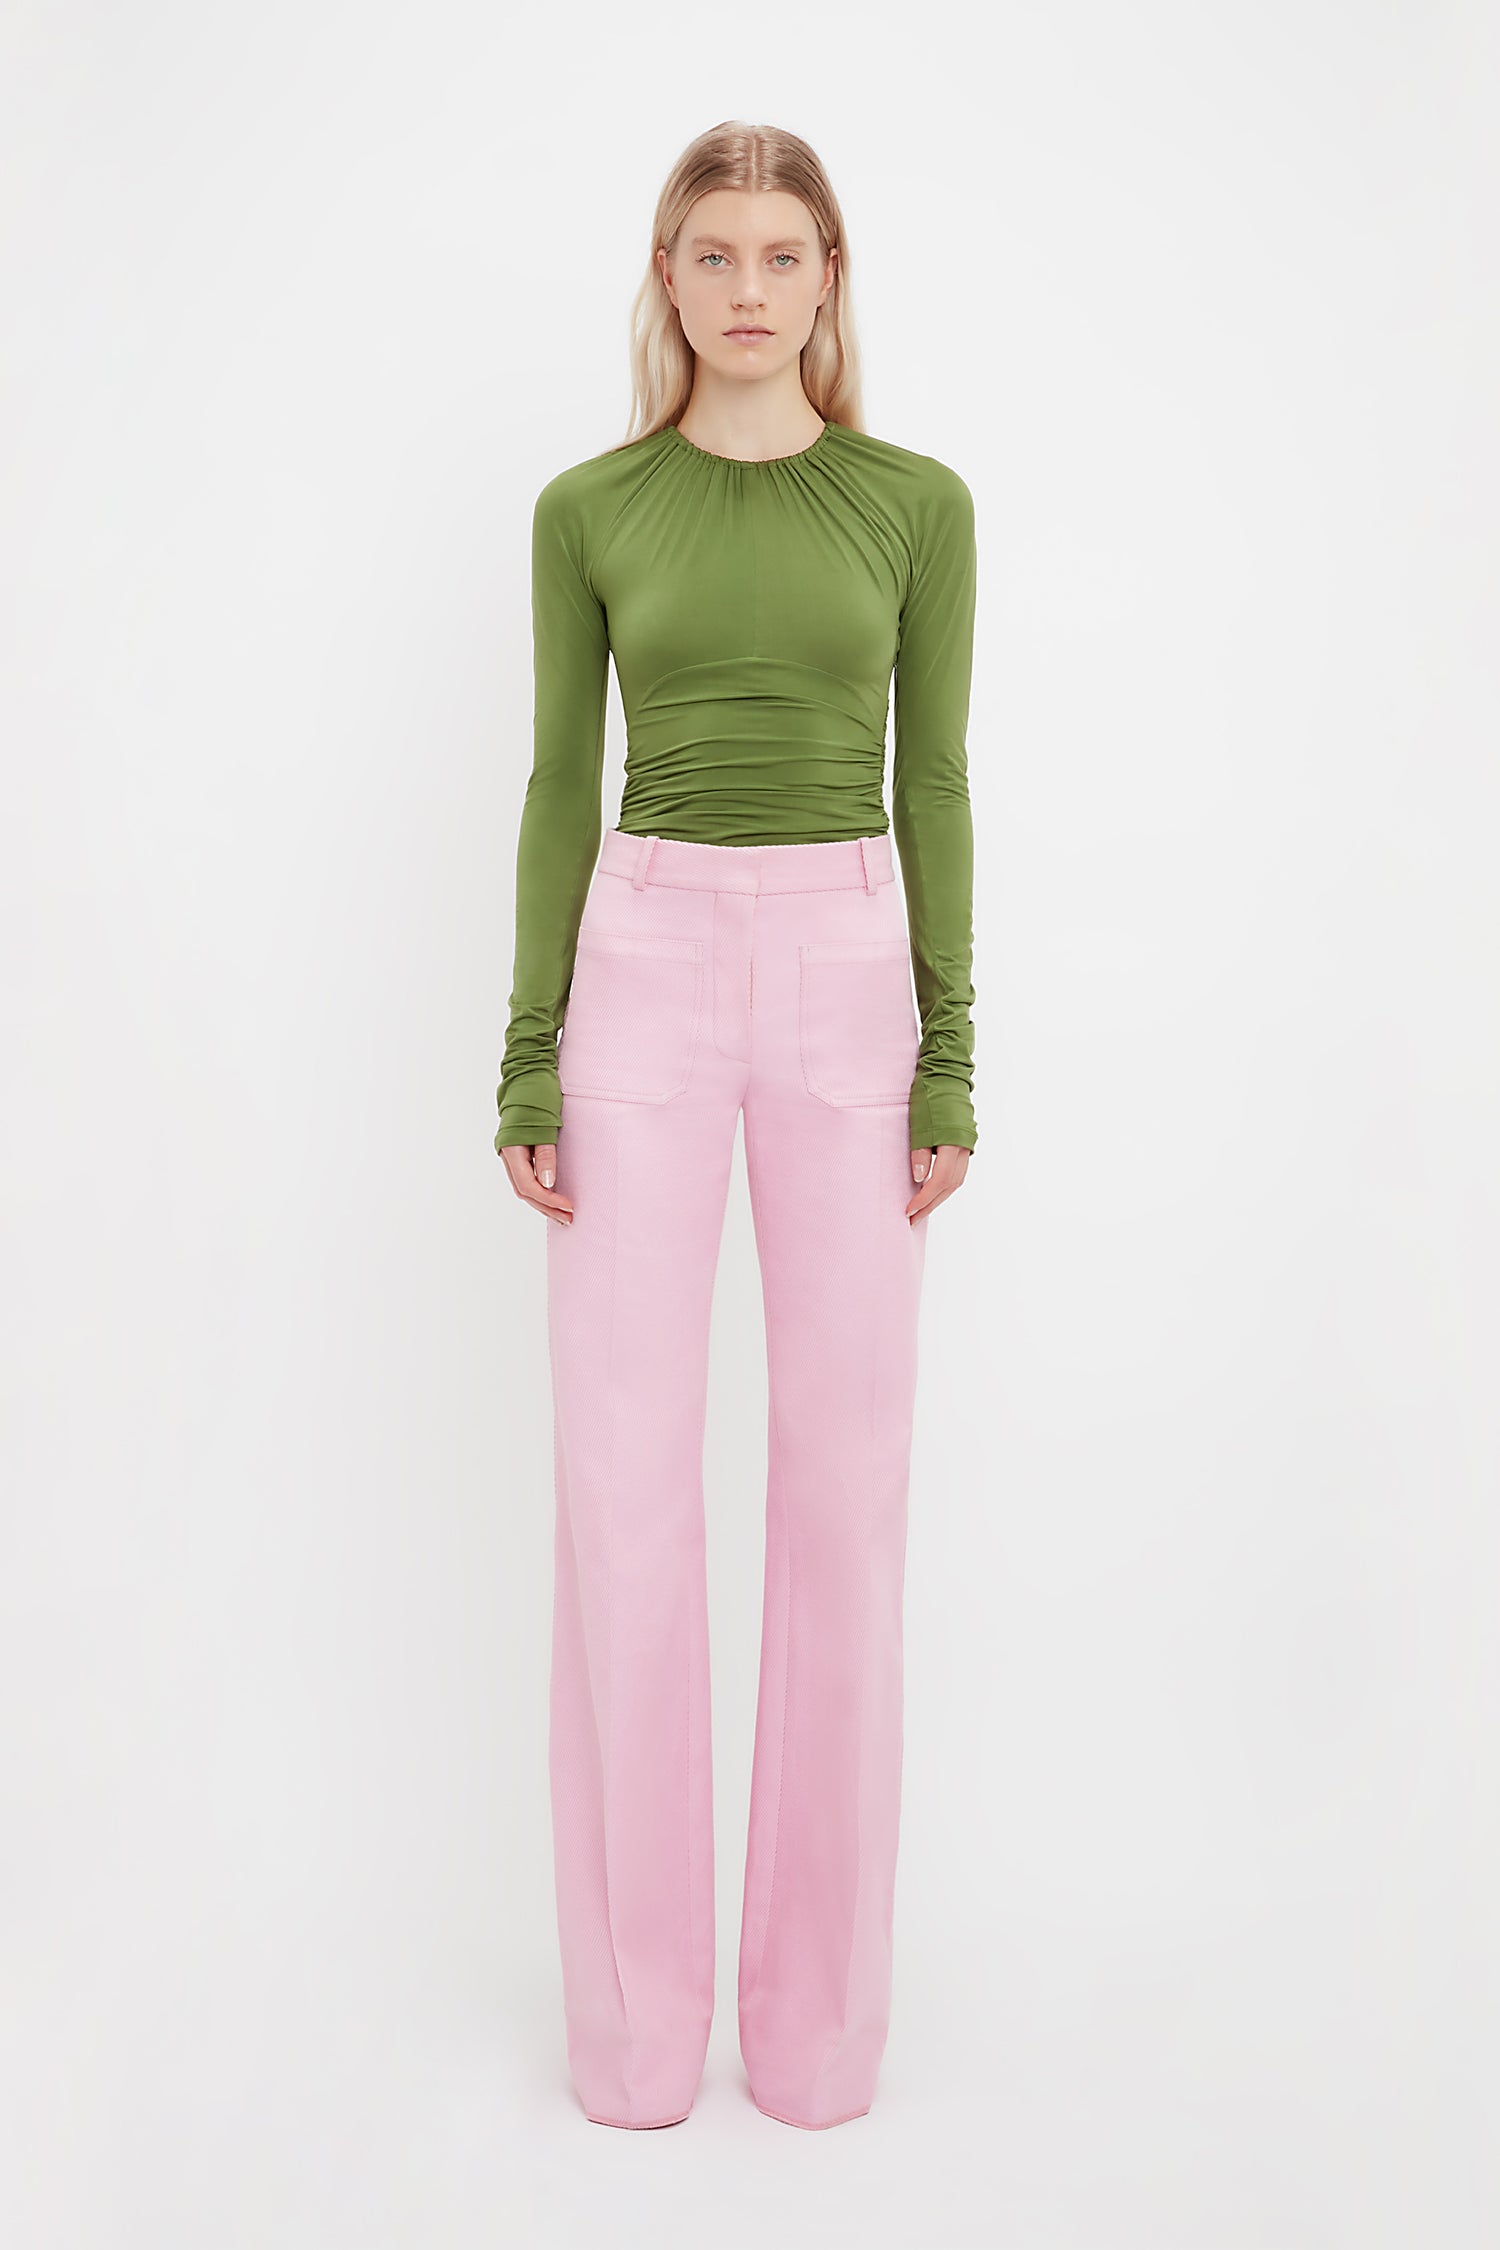 The bright pink bubblegum coloured Alina Trousers from designer Victoria Beckham. These tailored wide leg trousers come in a pink for a subtle yet standout look. Perfect trousers for workwear dressing or eveningwear.